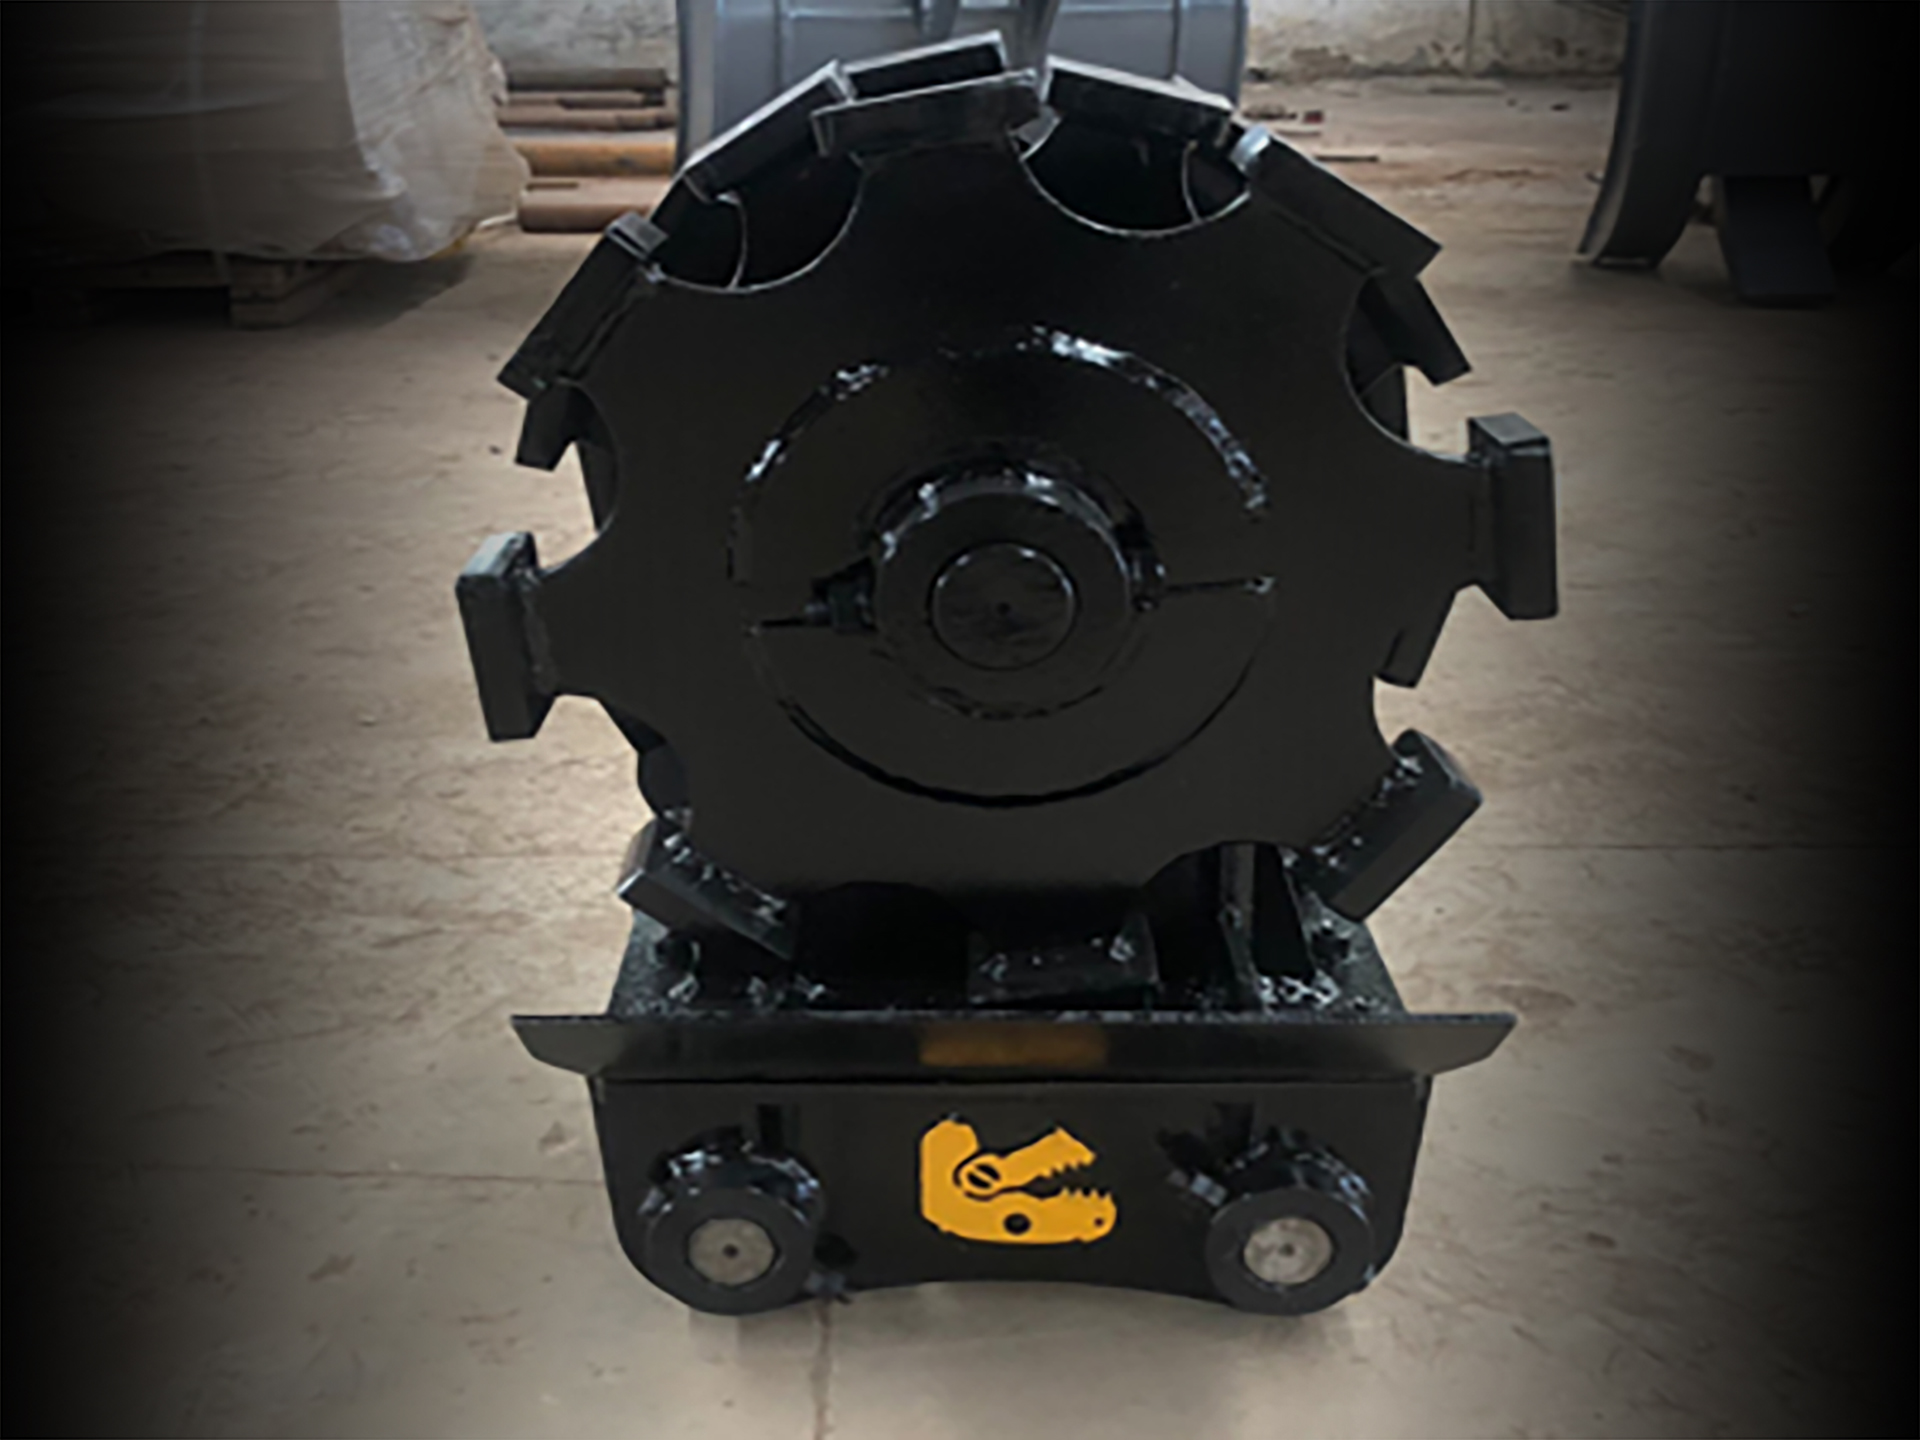 Why choose RSBM compaction wheel?